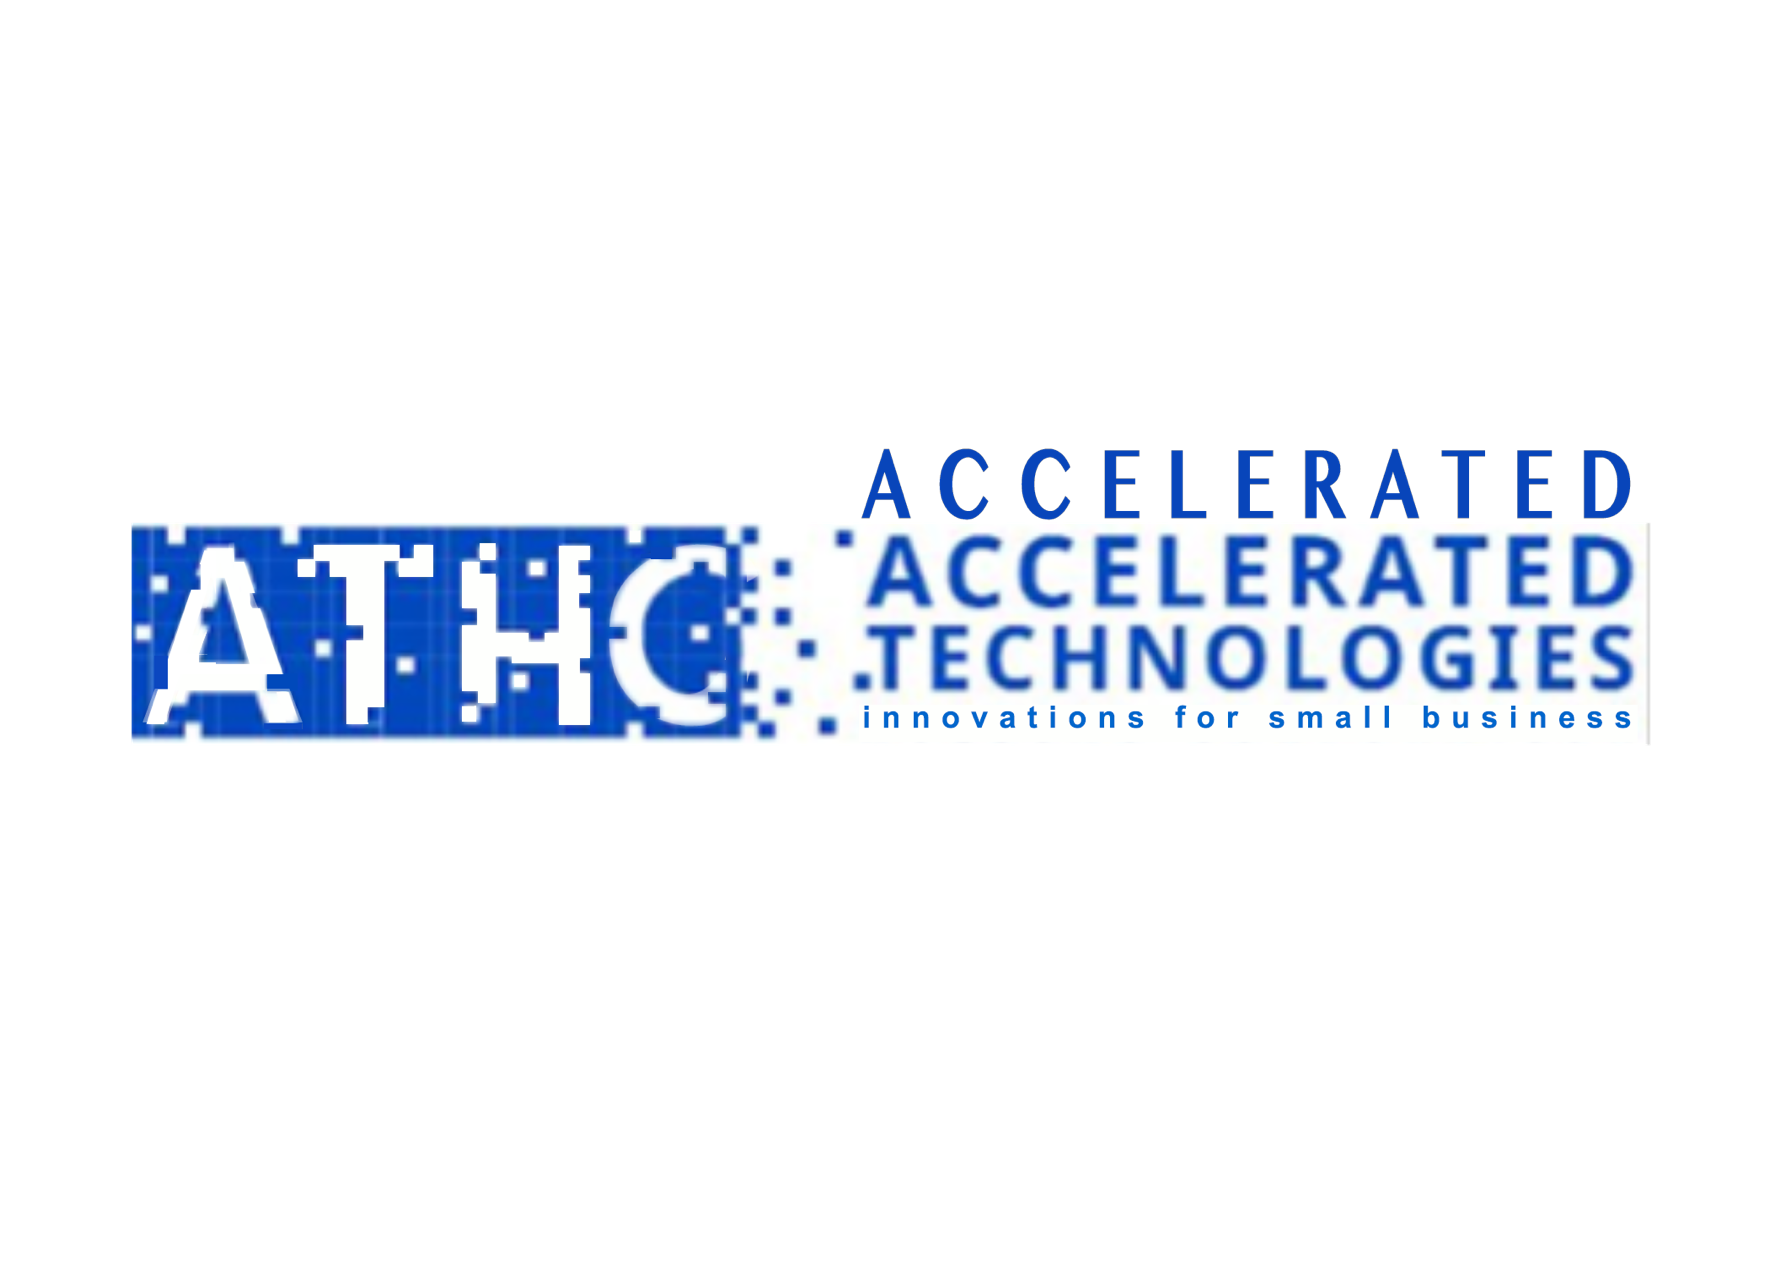 Accelerated Technologies Holding Corp., Friday, July 8, 2022, Press release picture